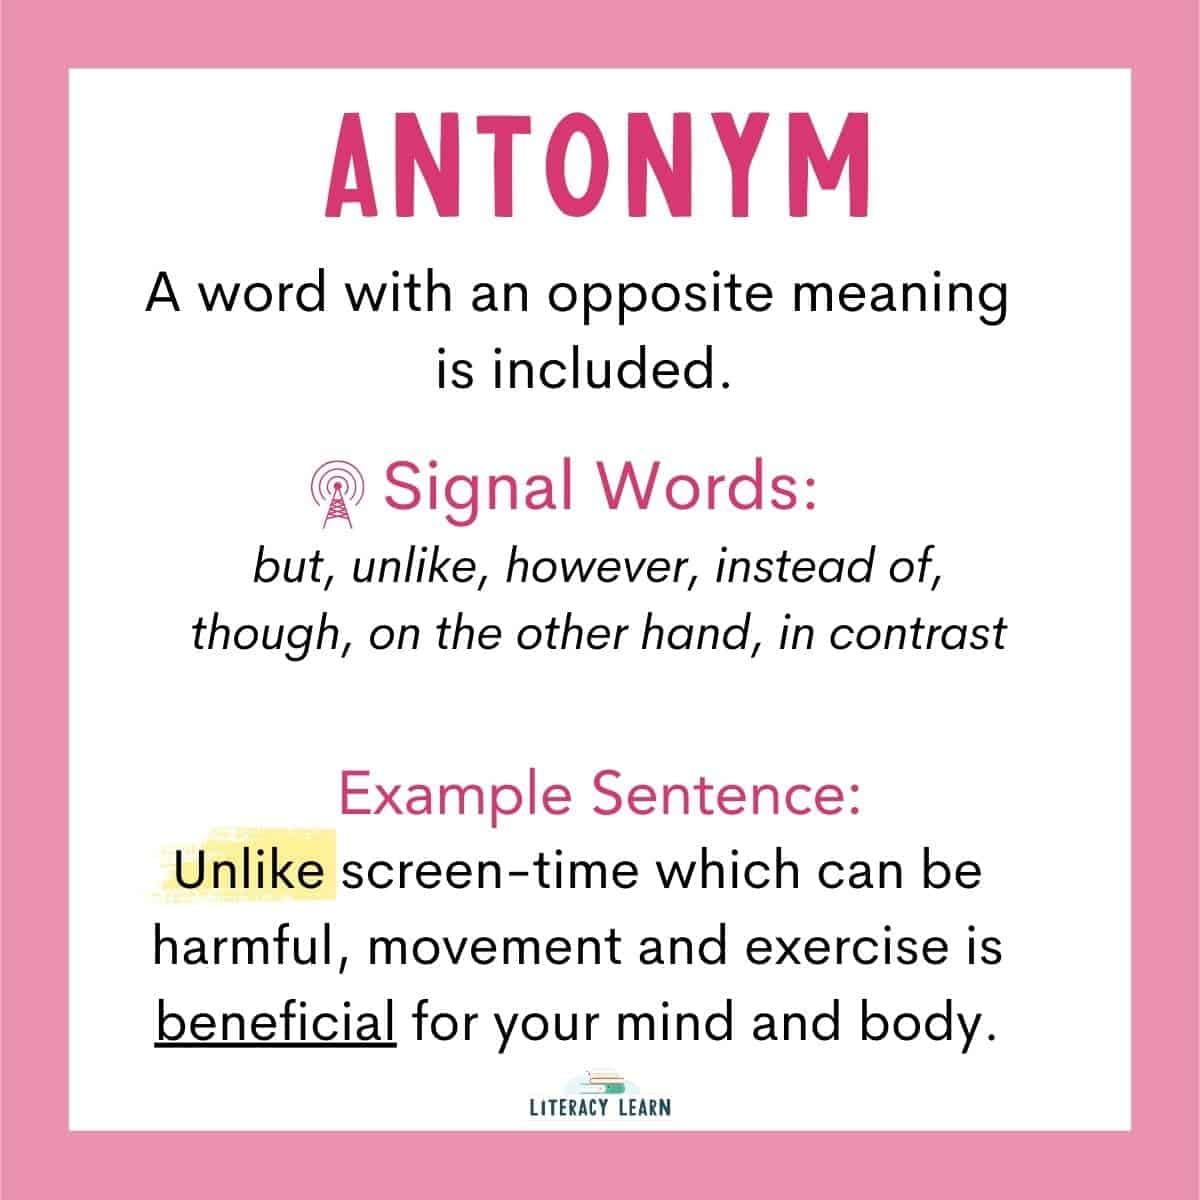 Rose-colored visual of an antonym context clue with the meaning, signal words, and example.